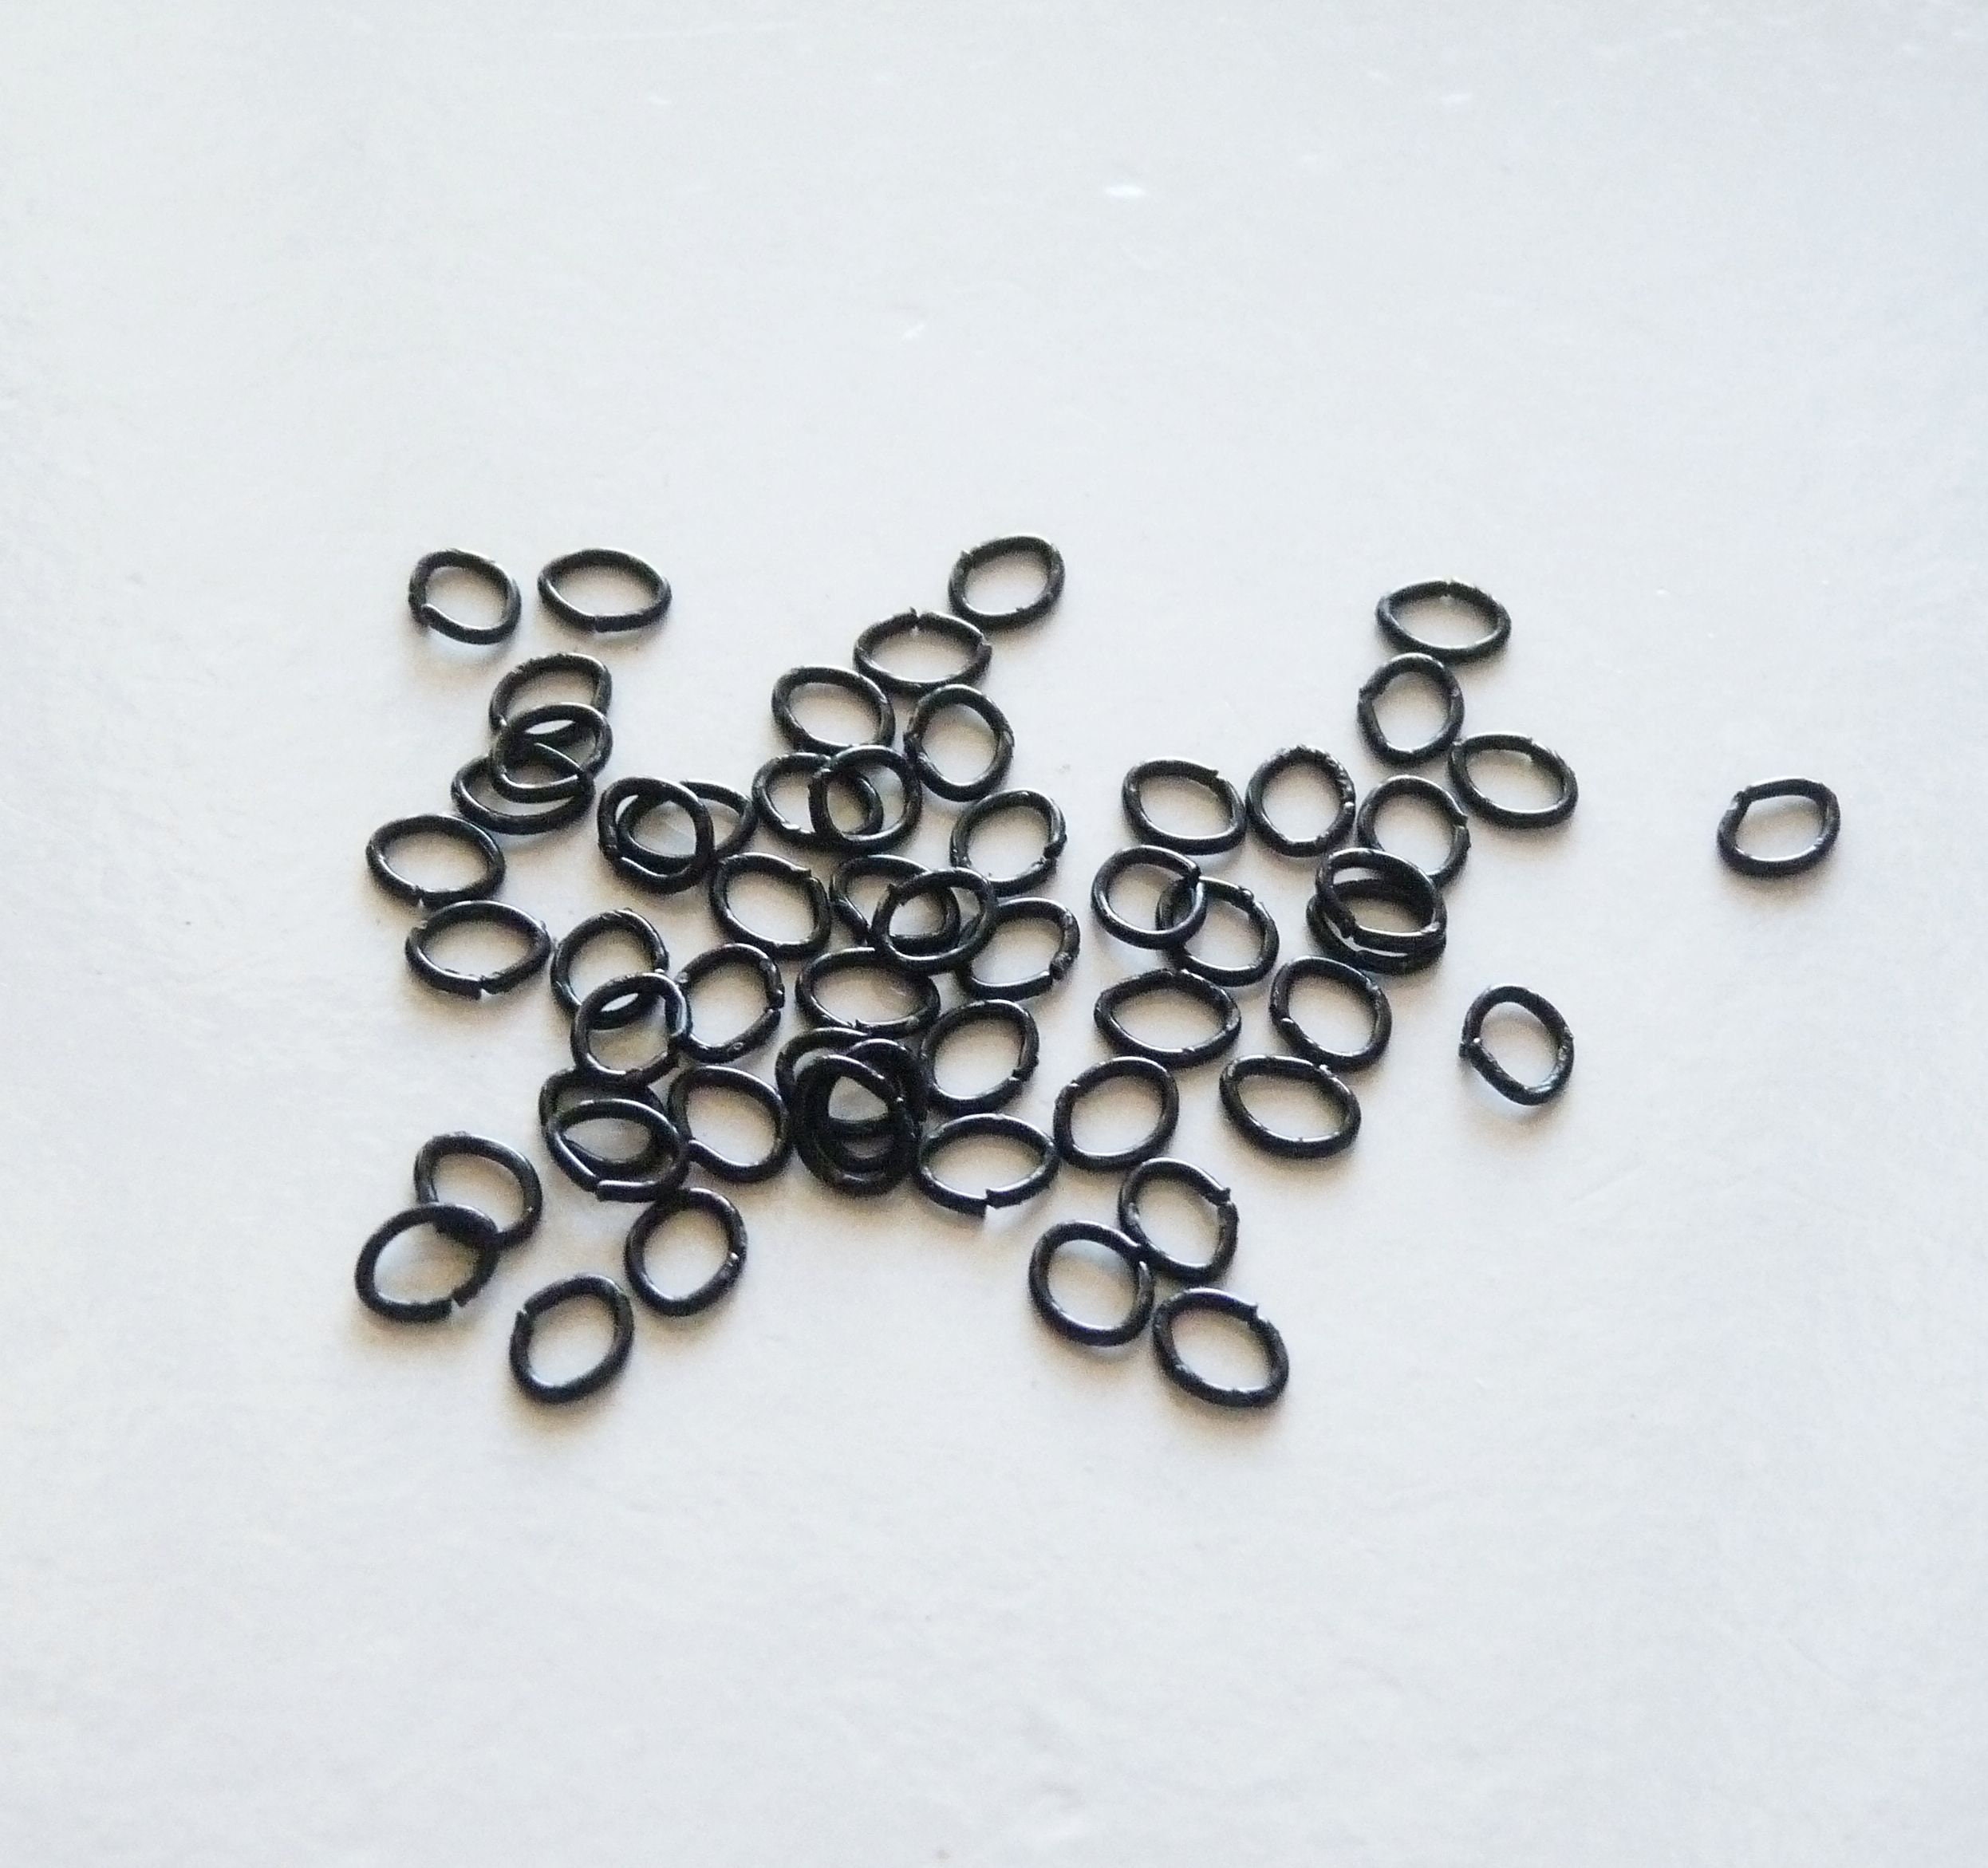 350pcs/box Gun Black Jewelry Making Supplies Set With 50pcs Alloy Lobster  Clasps 300pcs Jump Rings Connector Clasps Roll End Bracelet Necklace Chain E